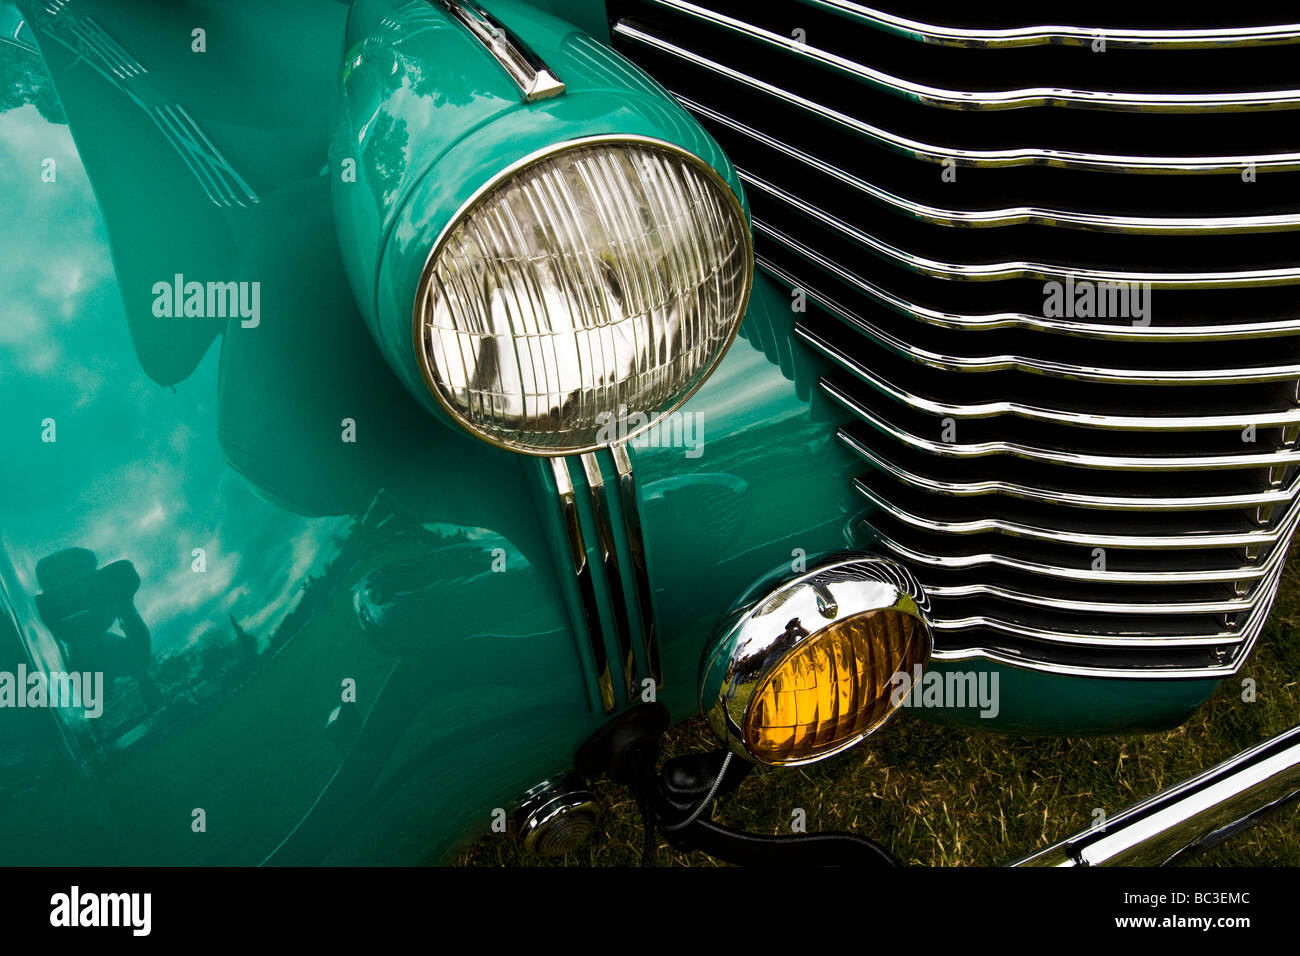 Detail der 1938 Cadillac Grill Los Angeles Concours d Eleganz Rose Bowl Stockfoto